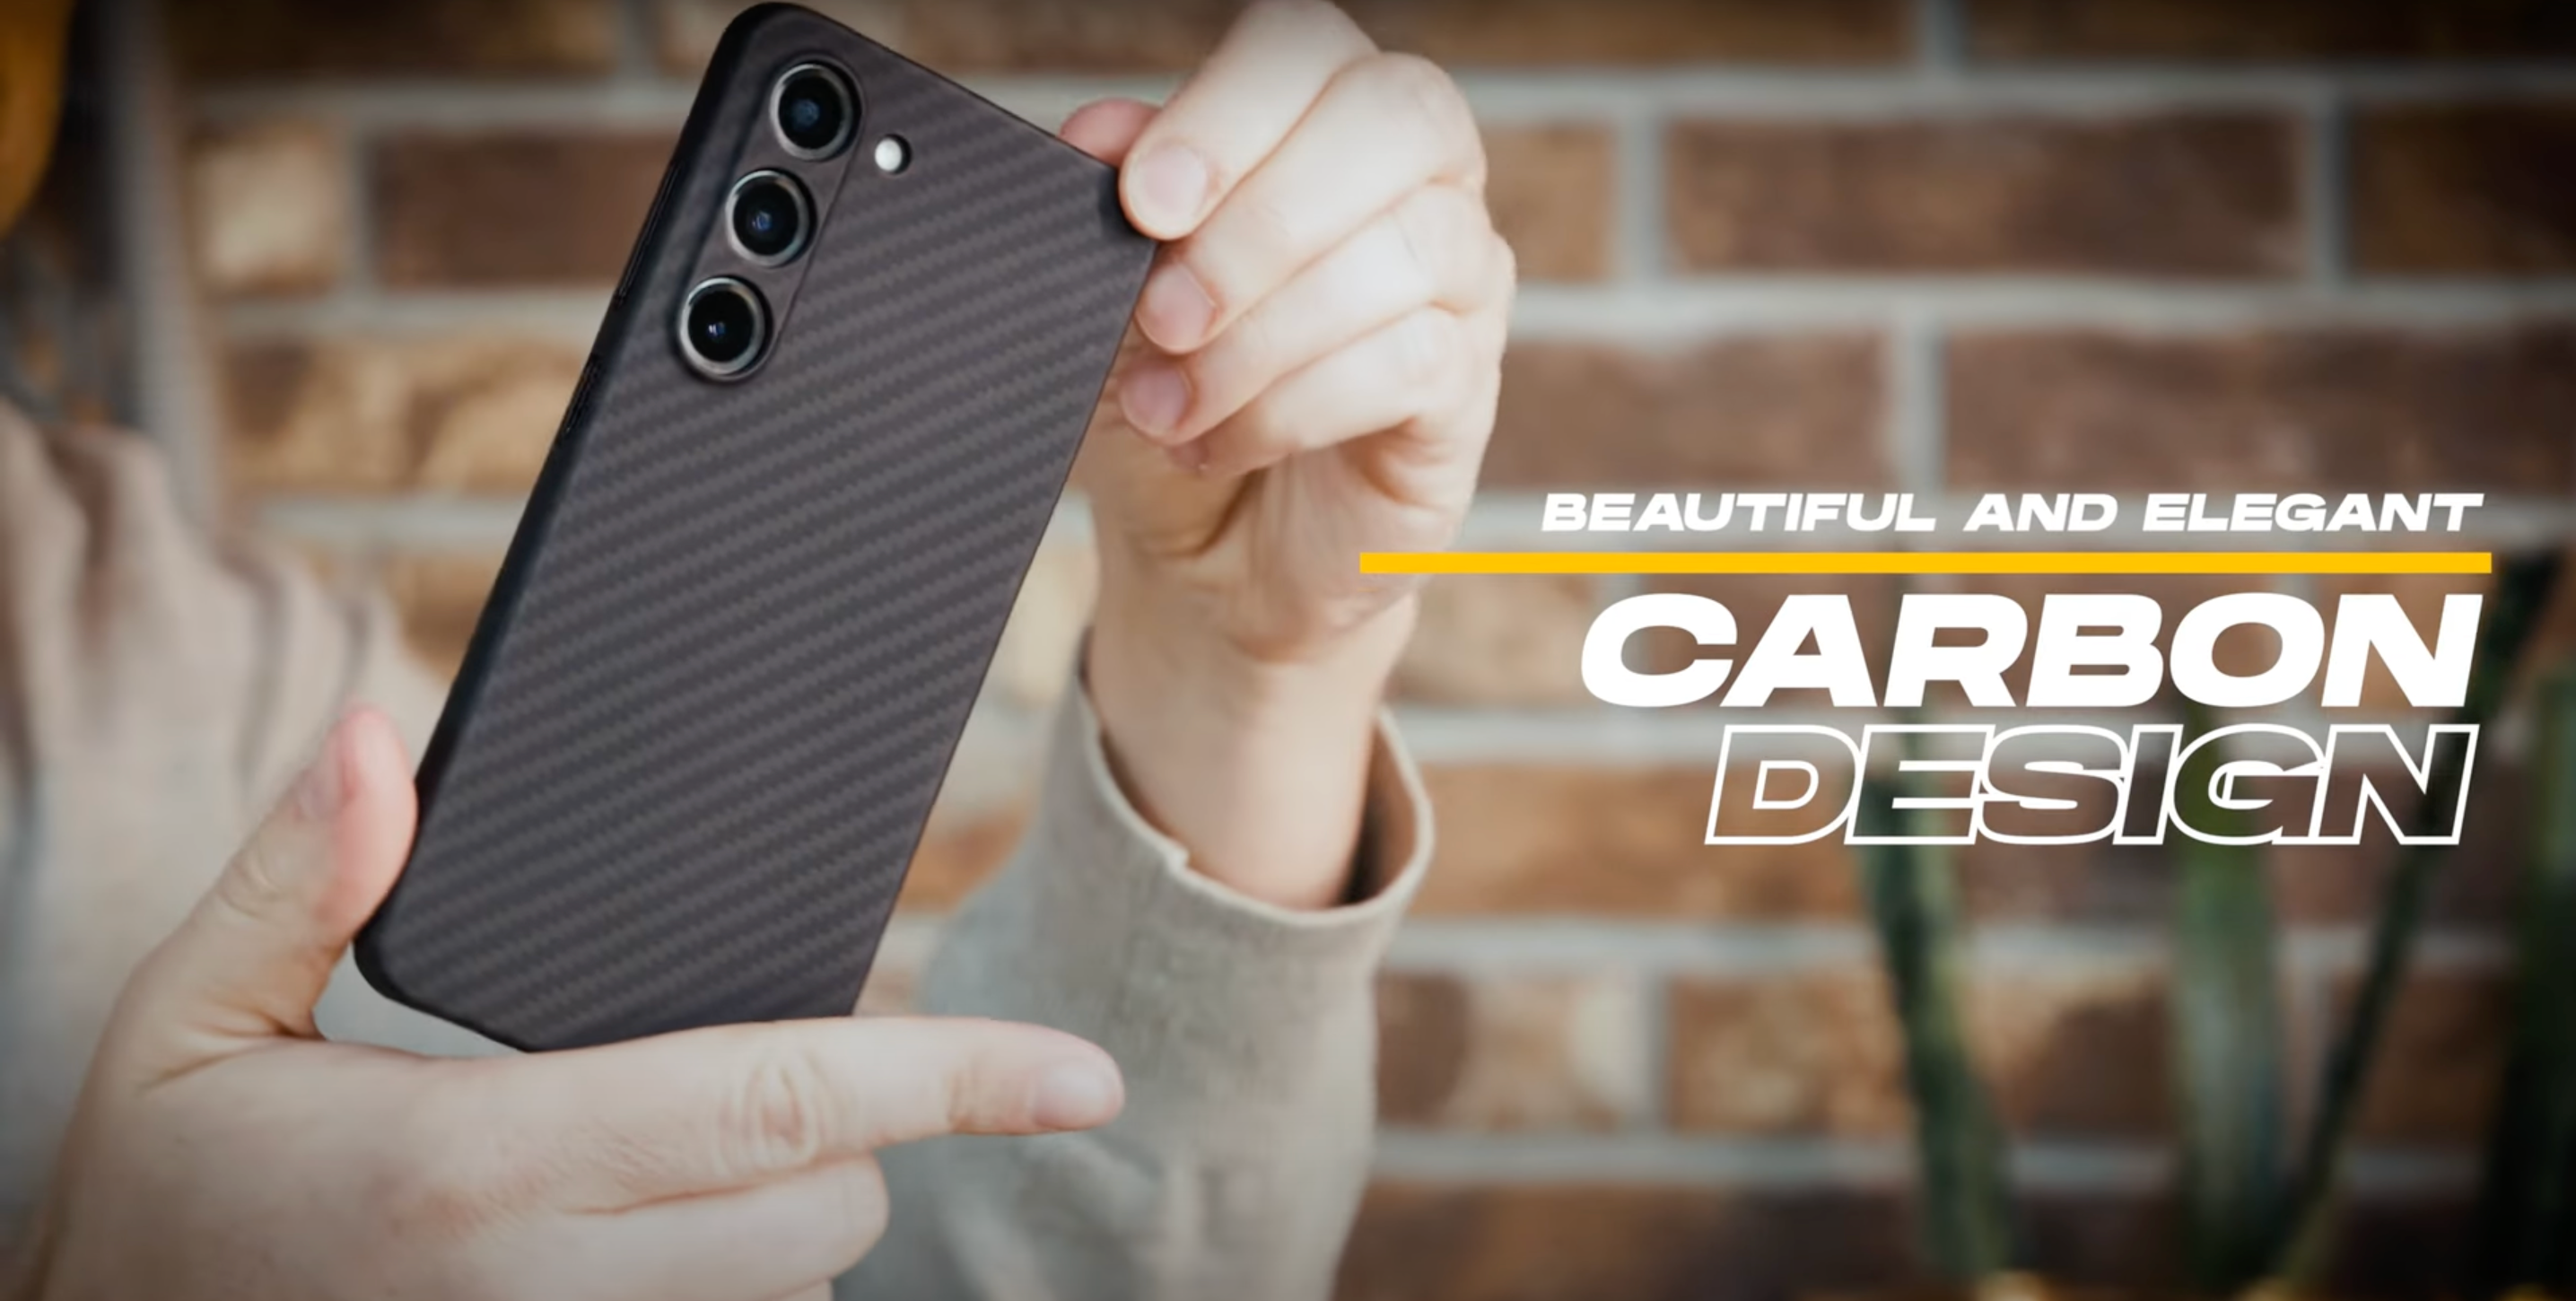 Load video: demonstrate our aramid fiber super thin phone case